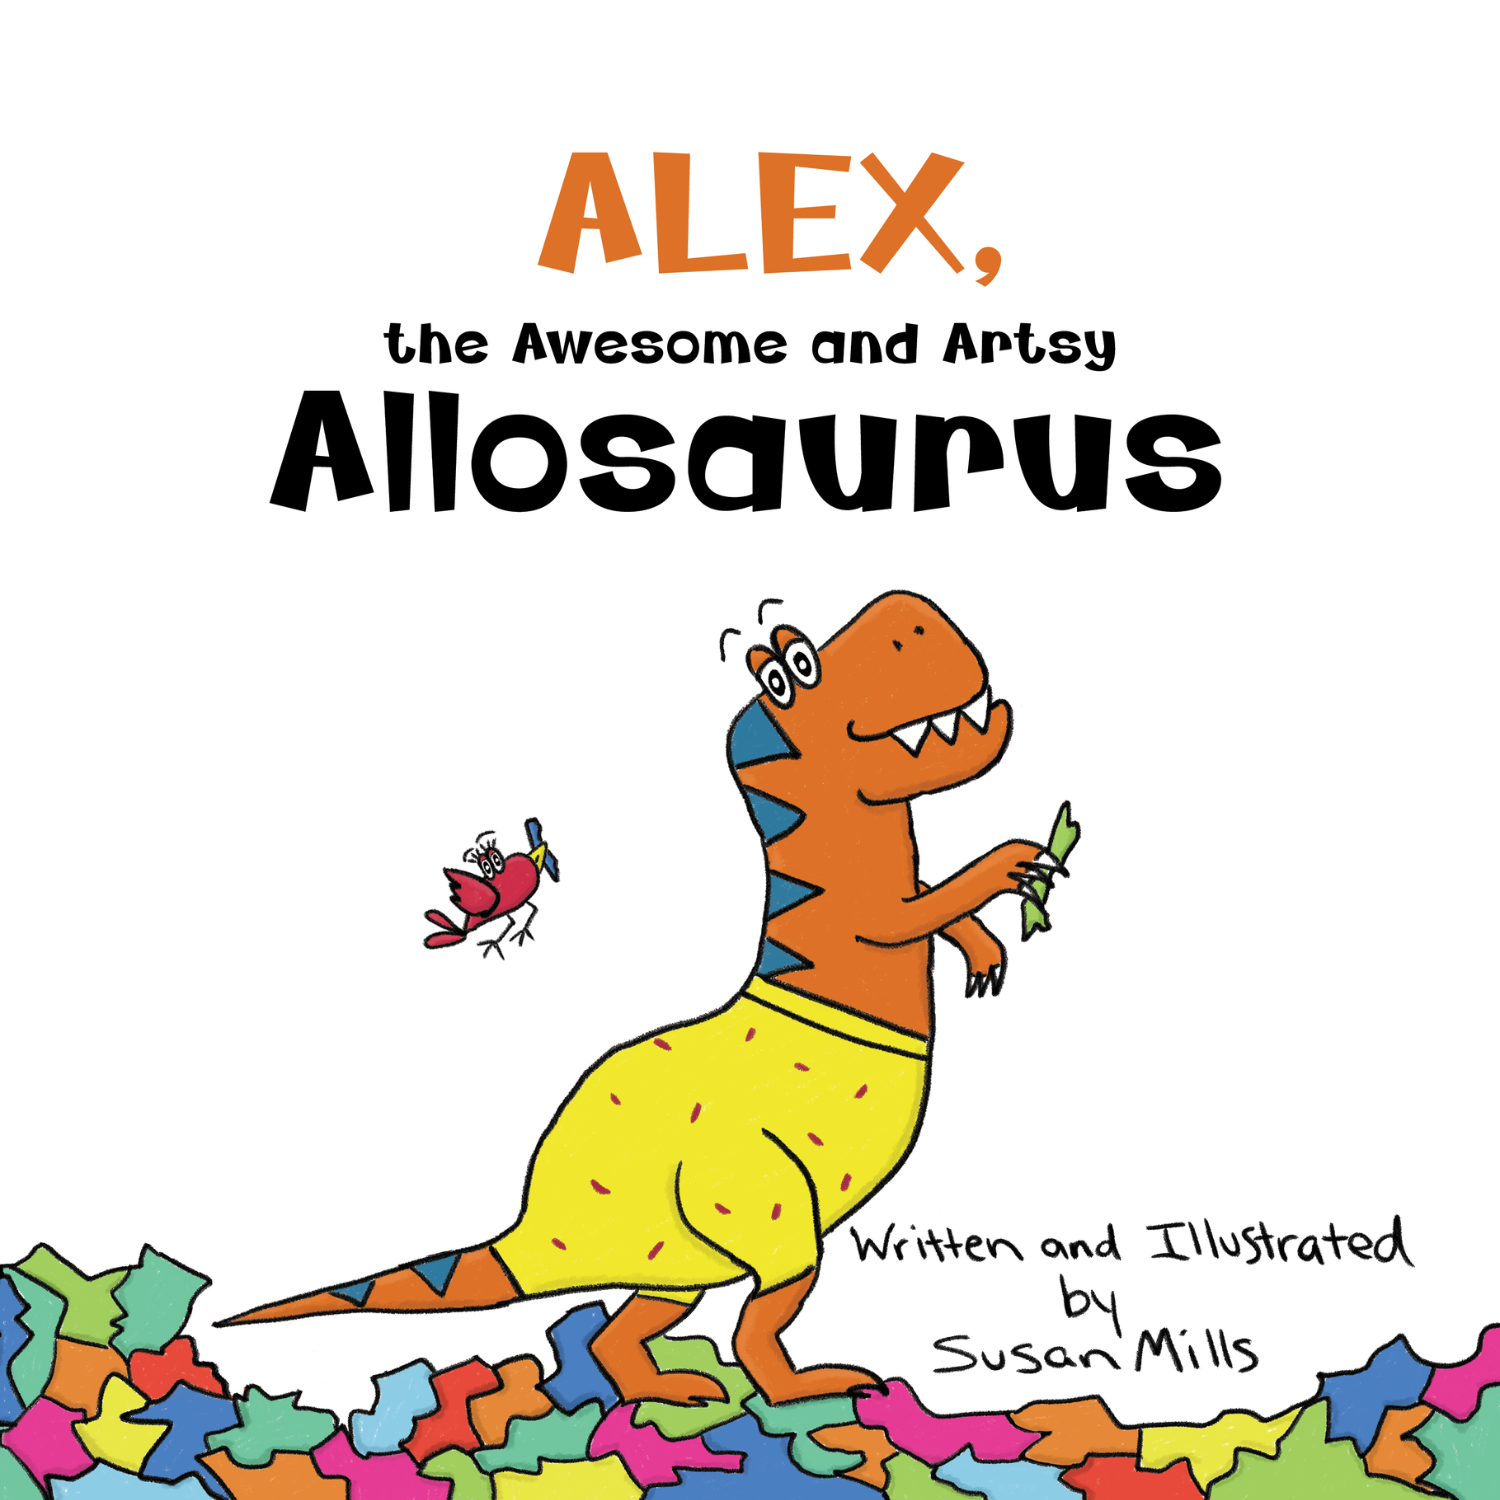 Susan Mills to Participate in the Kentucky Book Festival with “Alex, the Awesome and Artsy Allosaurus”